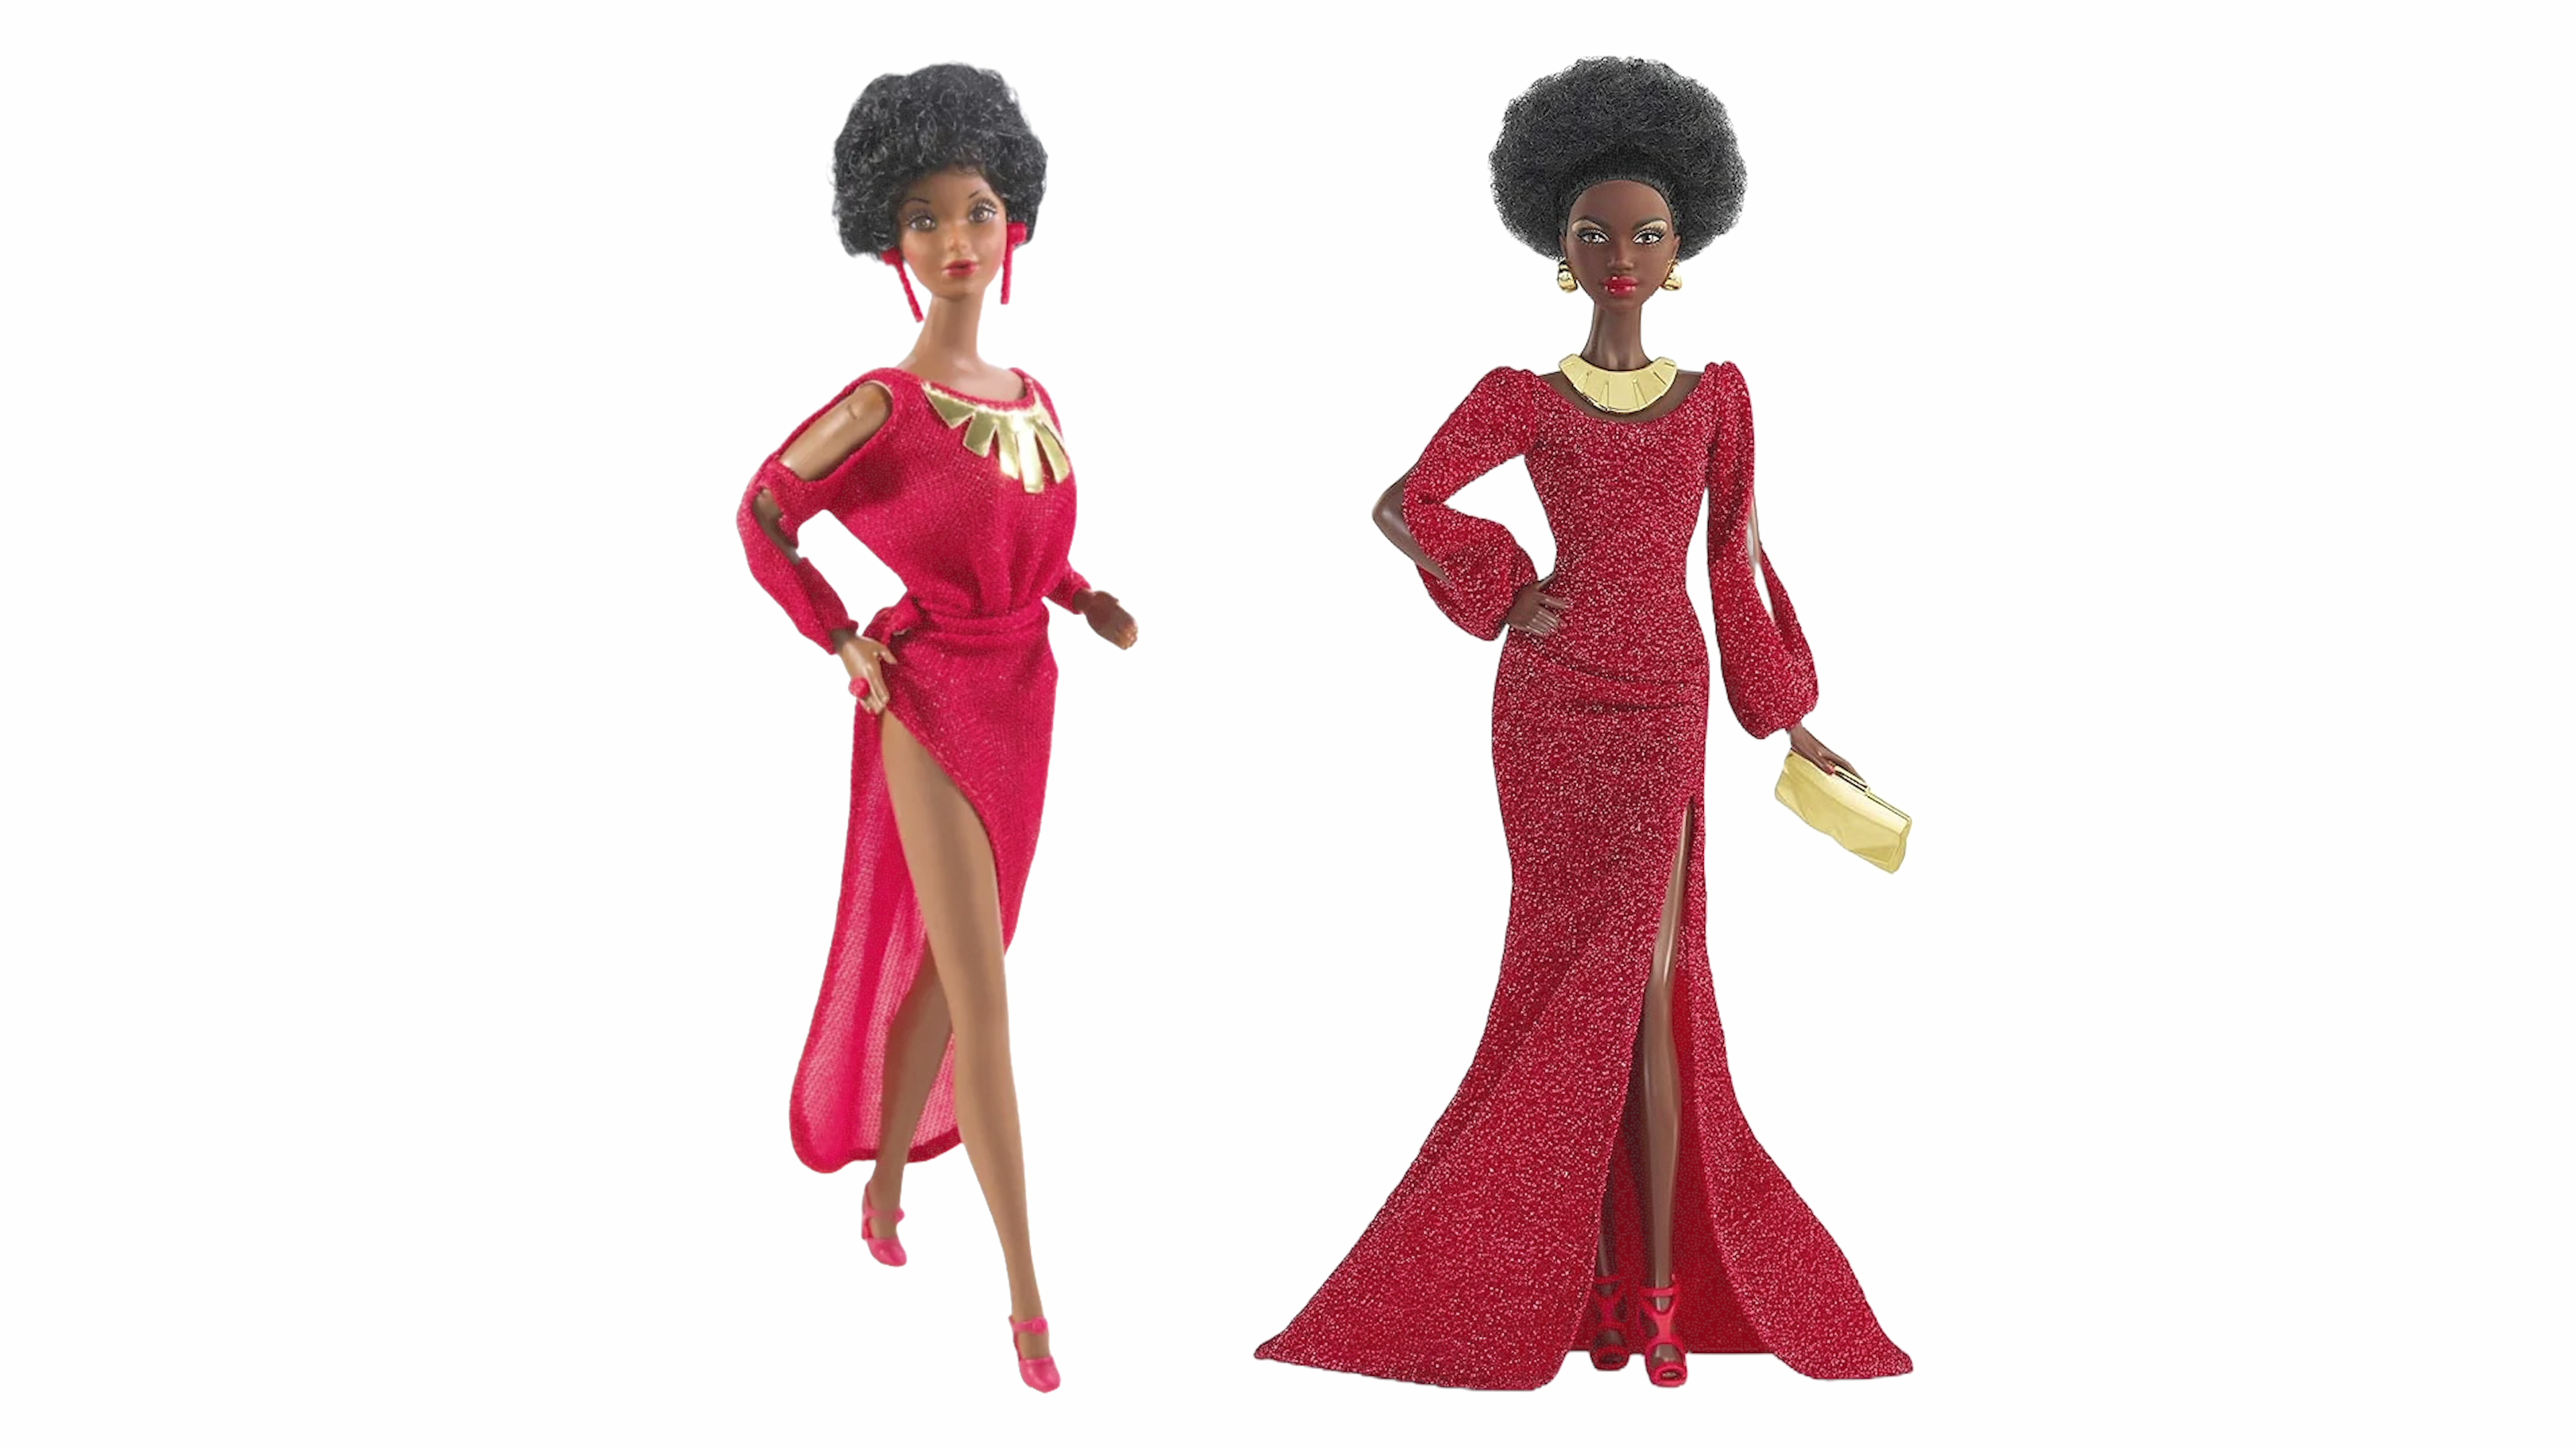 'Black Barbie' Filmmaker Hopes To See An Uptick In Black Designers At Mattel As A Result Of Her Documentary